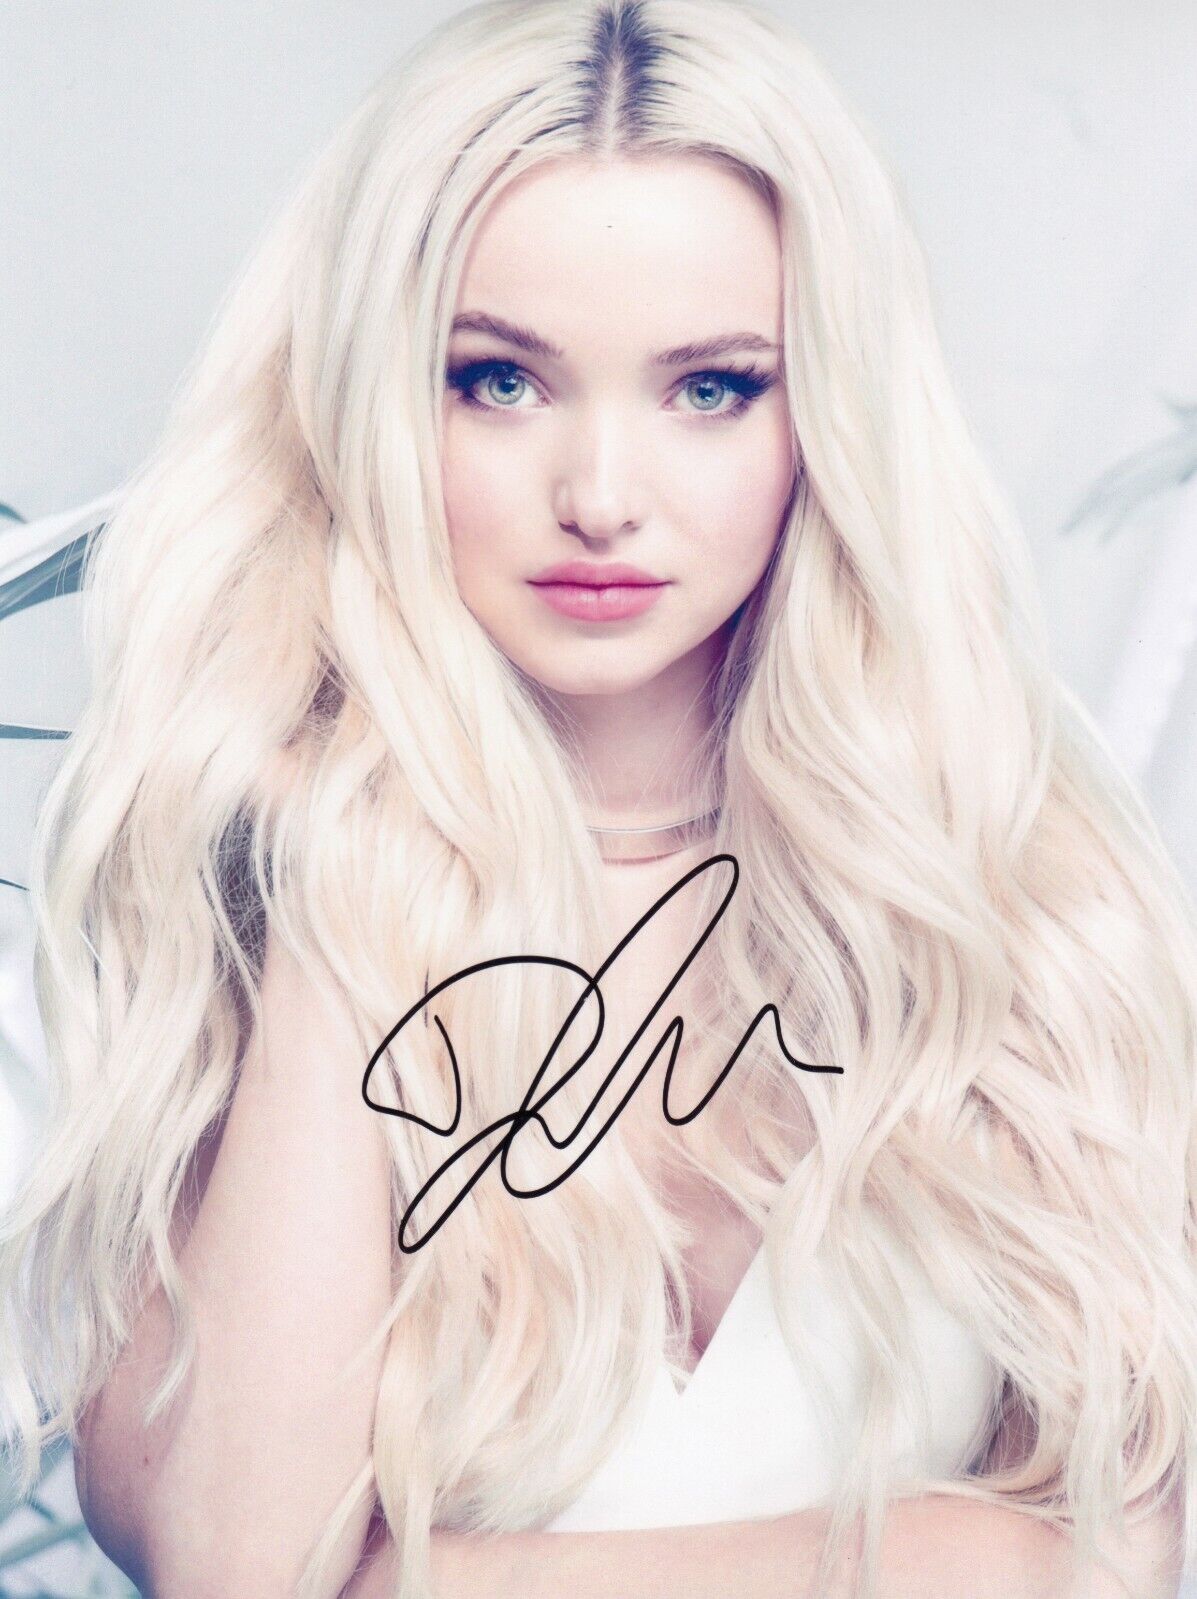 Dove Cameron Signed Auto 8 x 10 Photo Poster paintinggraph